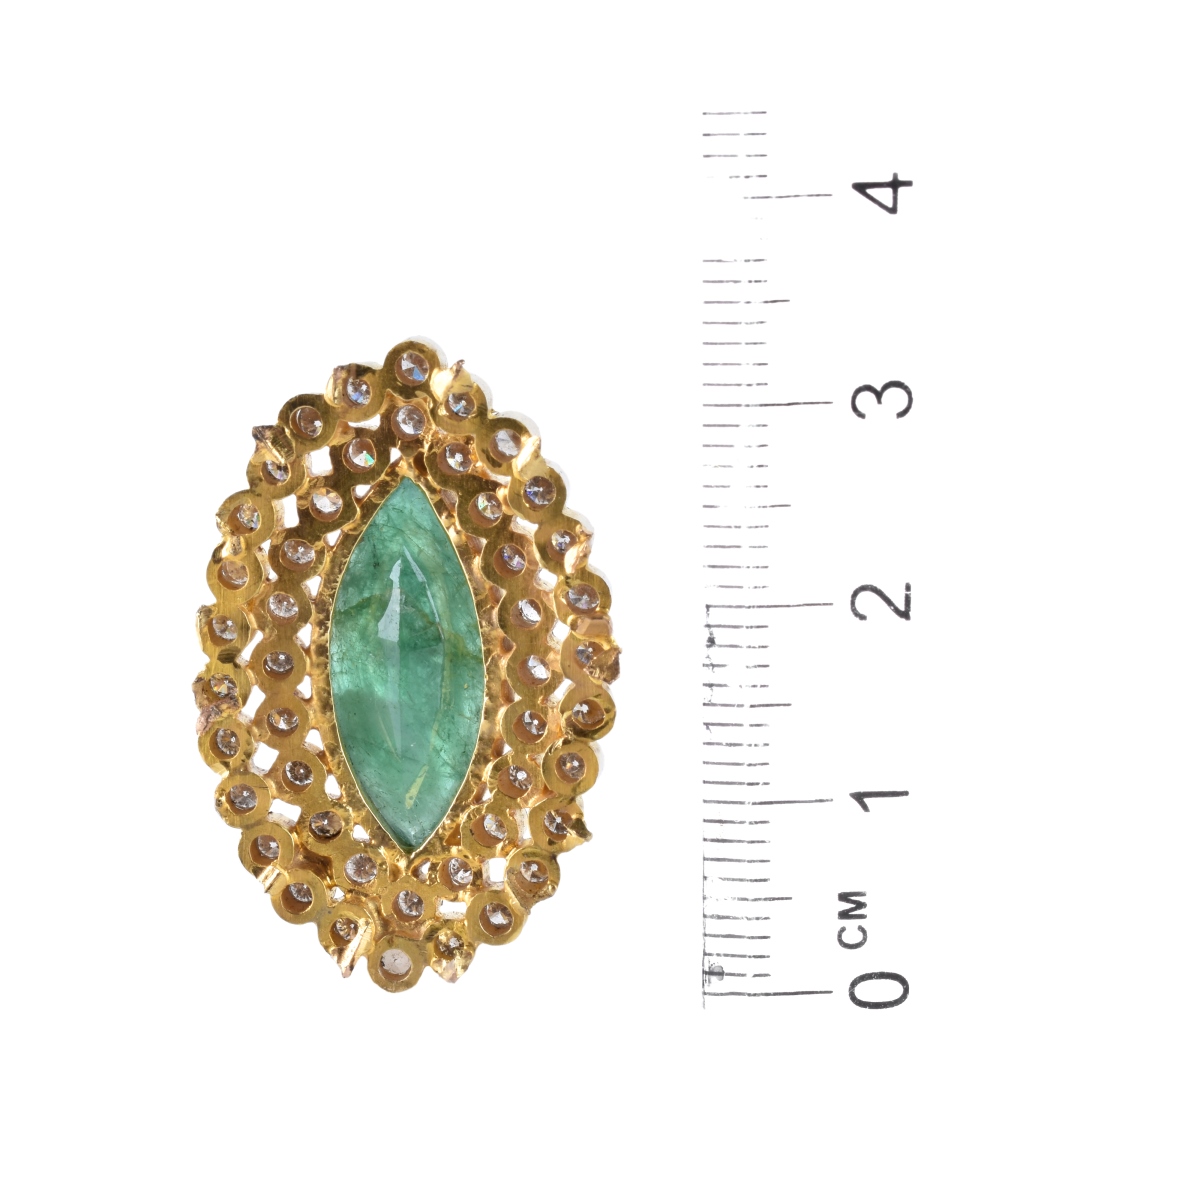 Emerald, Dimond and 18K Fragment